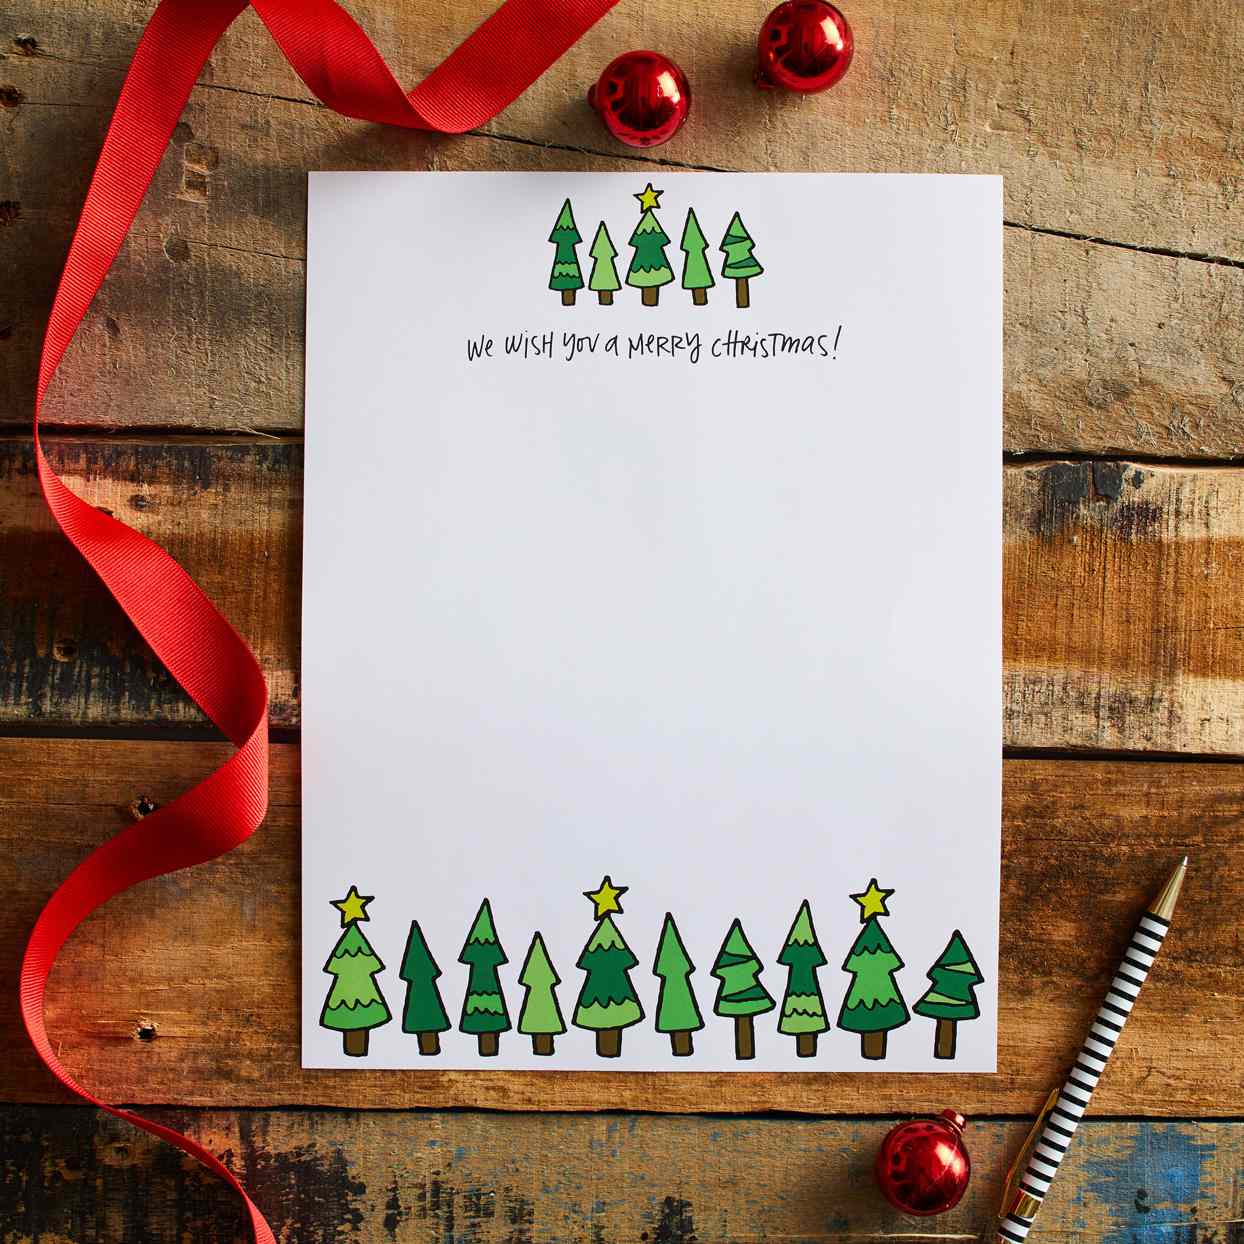 23 Free Christmas Letter Templates  Better Homes & Gardens With Regard To Christmas Letter Templates Microsoft Word